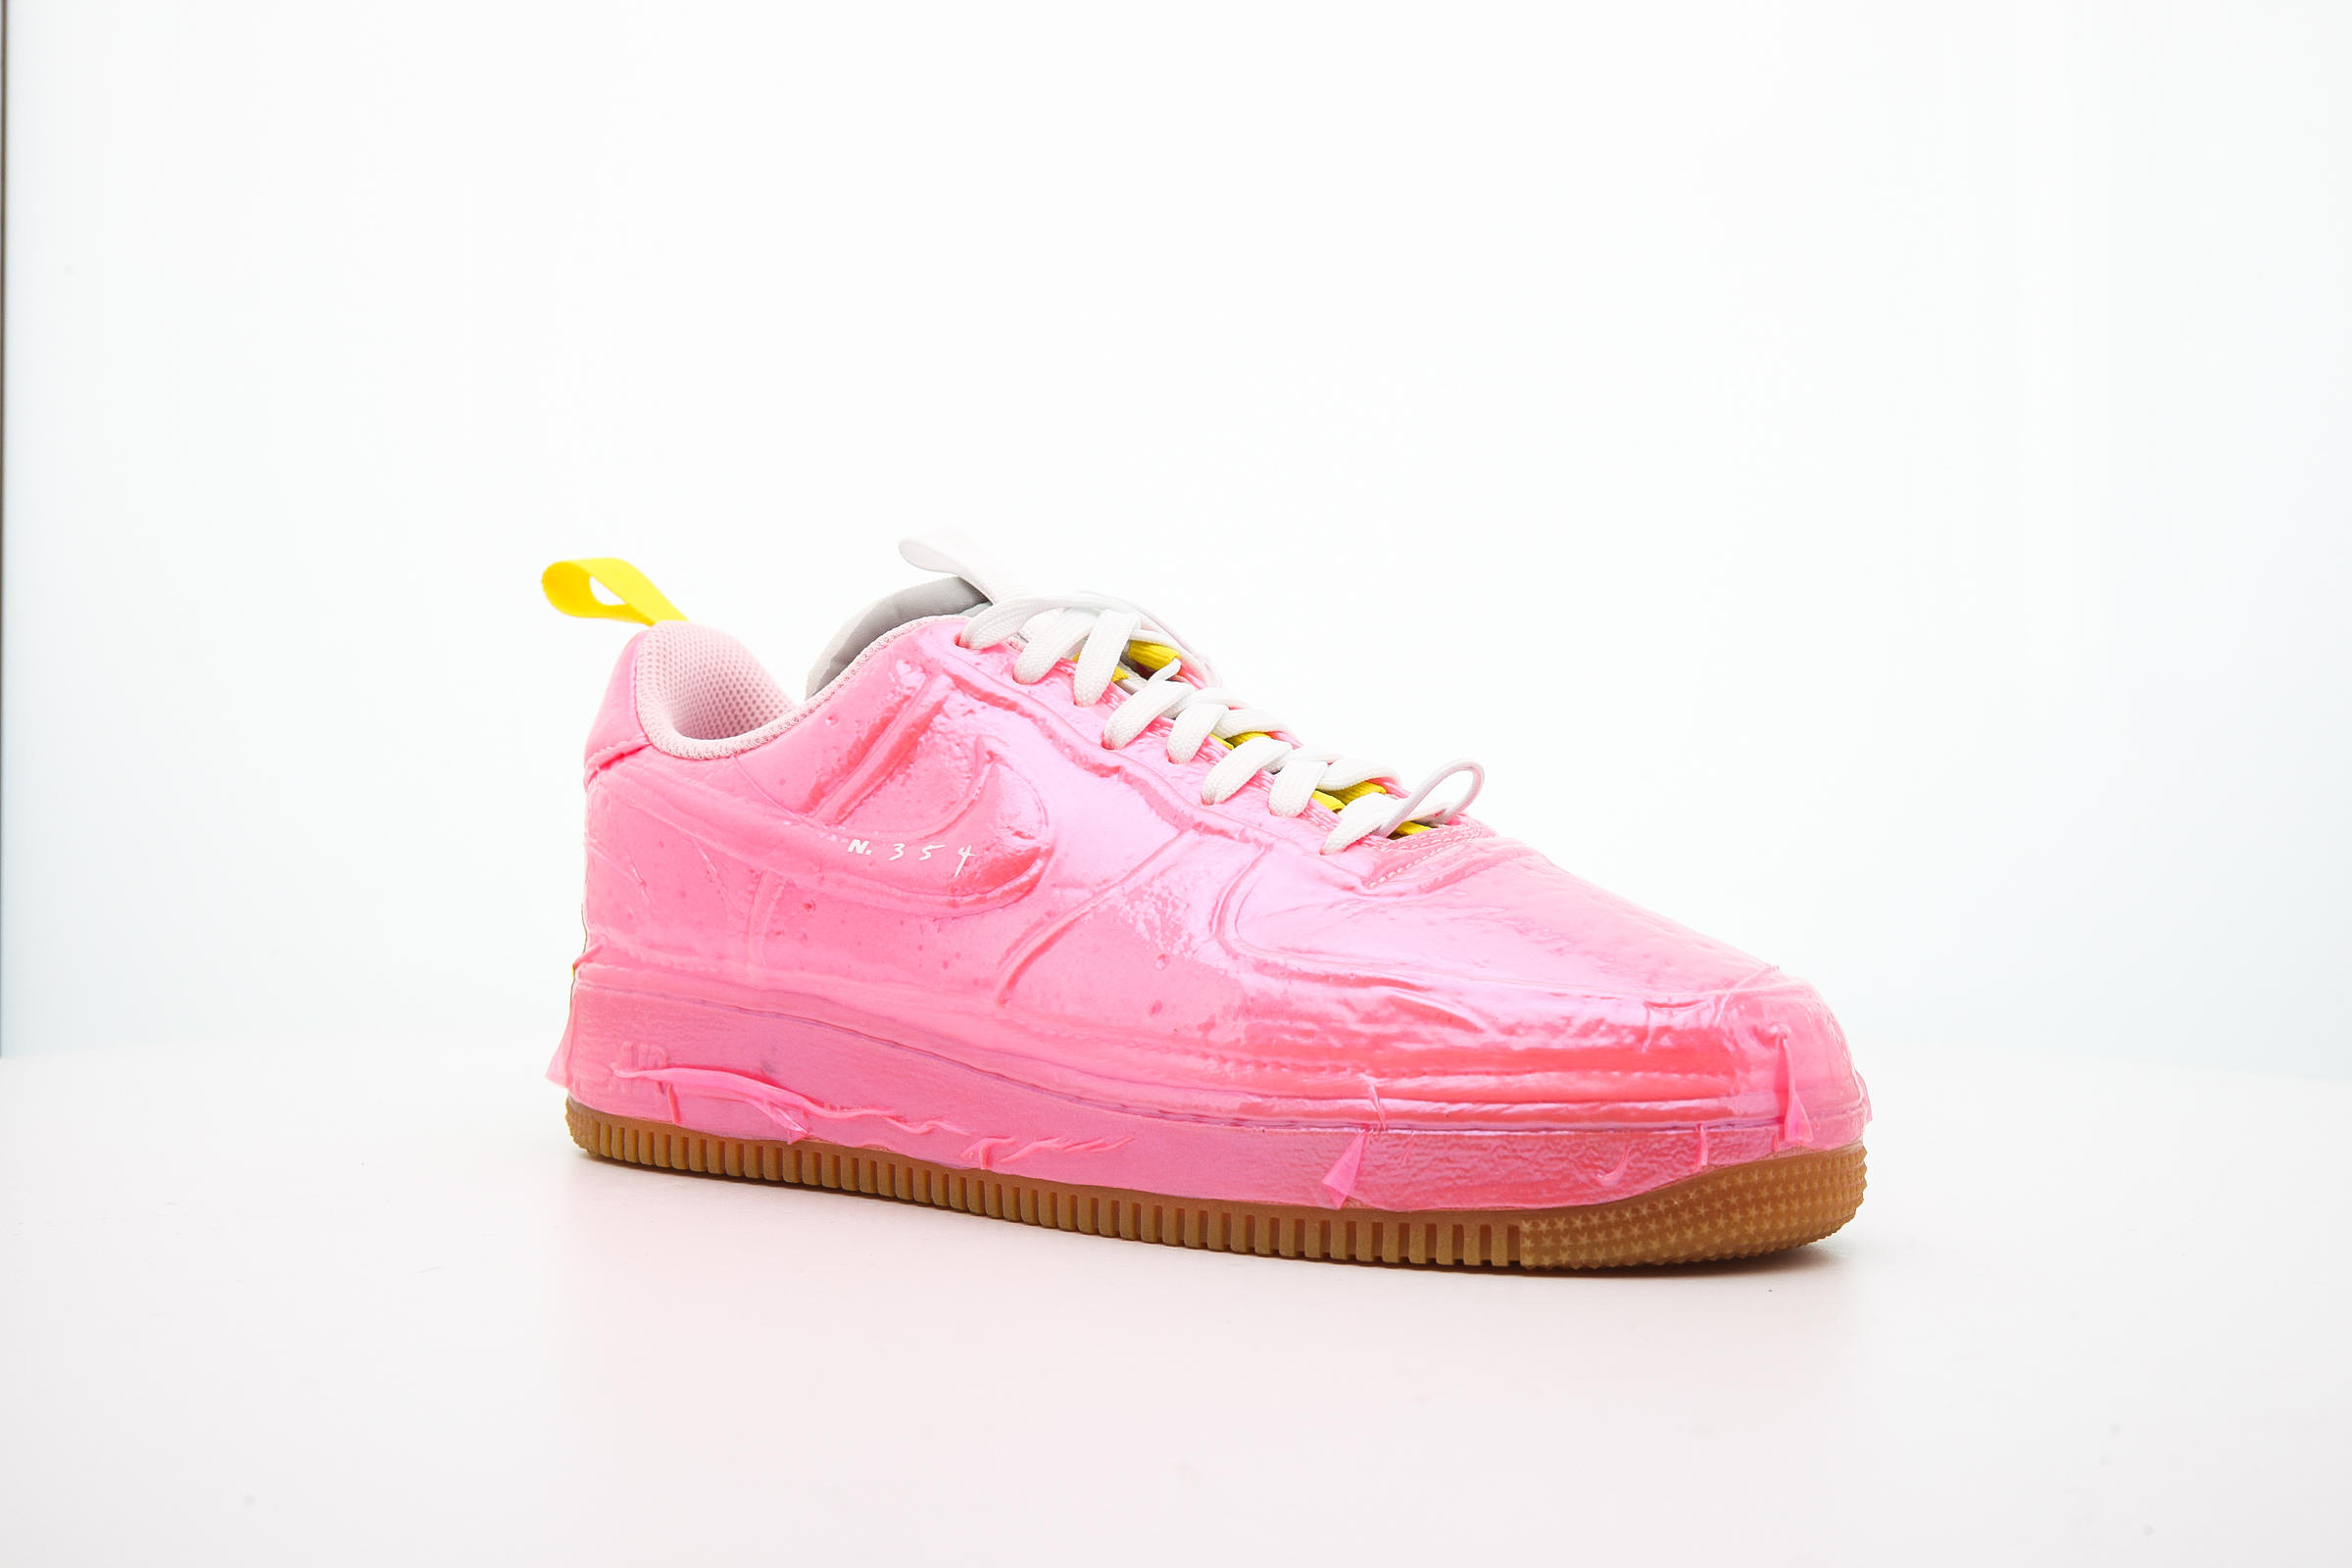 Nike AIR FORCE 1 EXPERIMENTAL "RACER PINK"